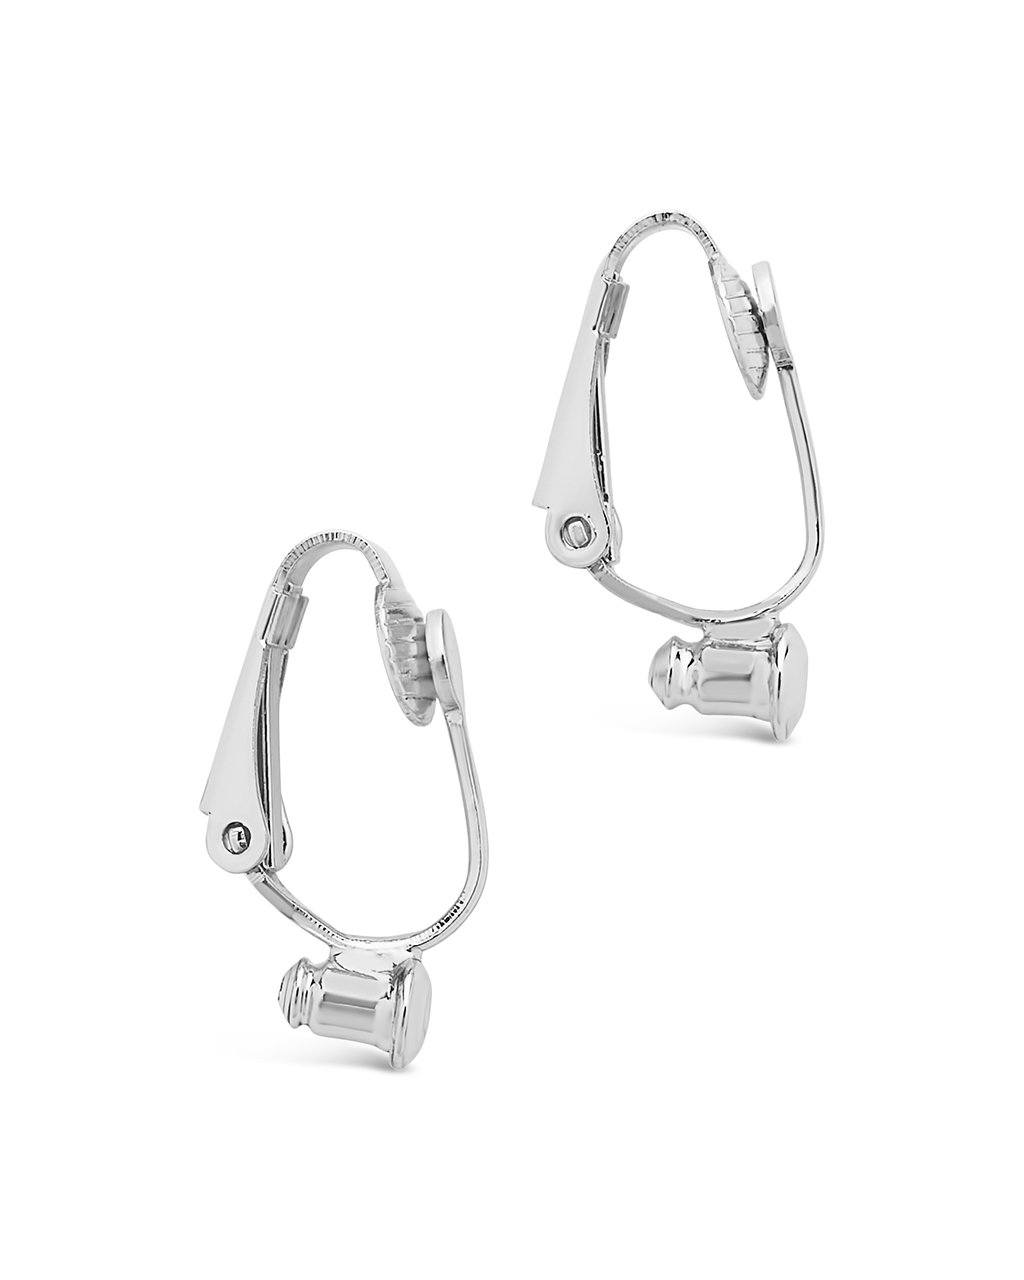 Sterling Silver Earring Backings by Sterling Forever - FabFitFun